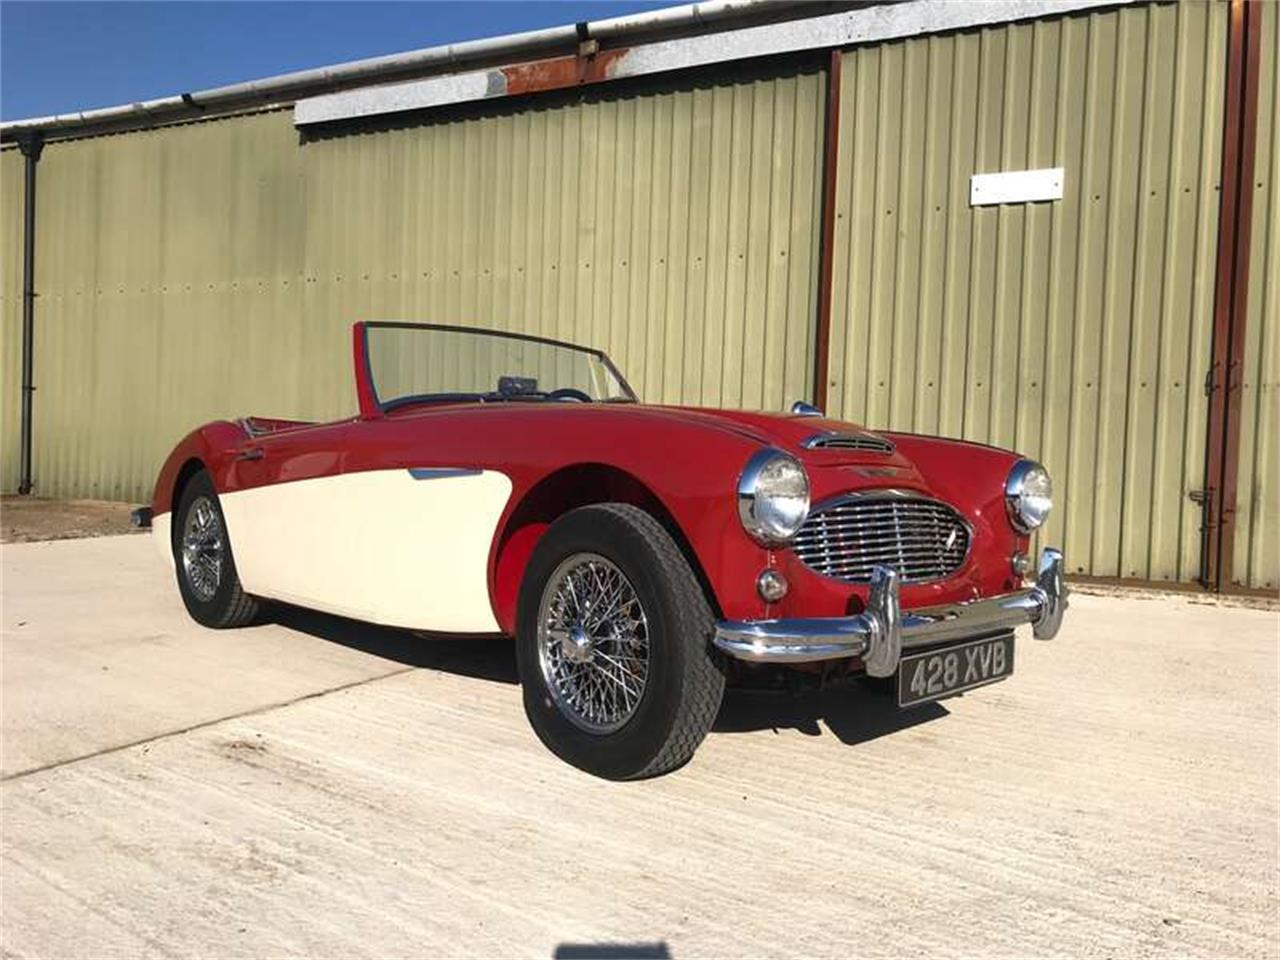 For Sale at Auction: 1960 Austin-Healey 3000 in Gaydon, Warwickshire